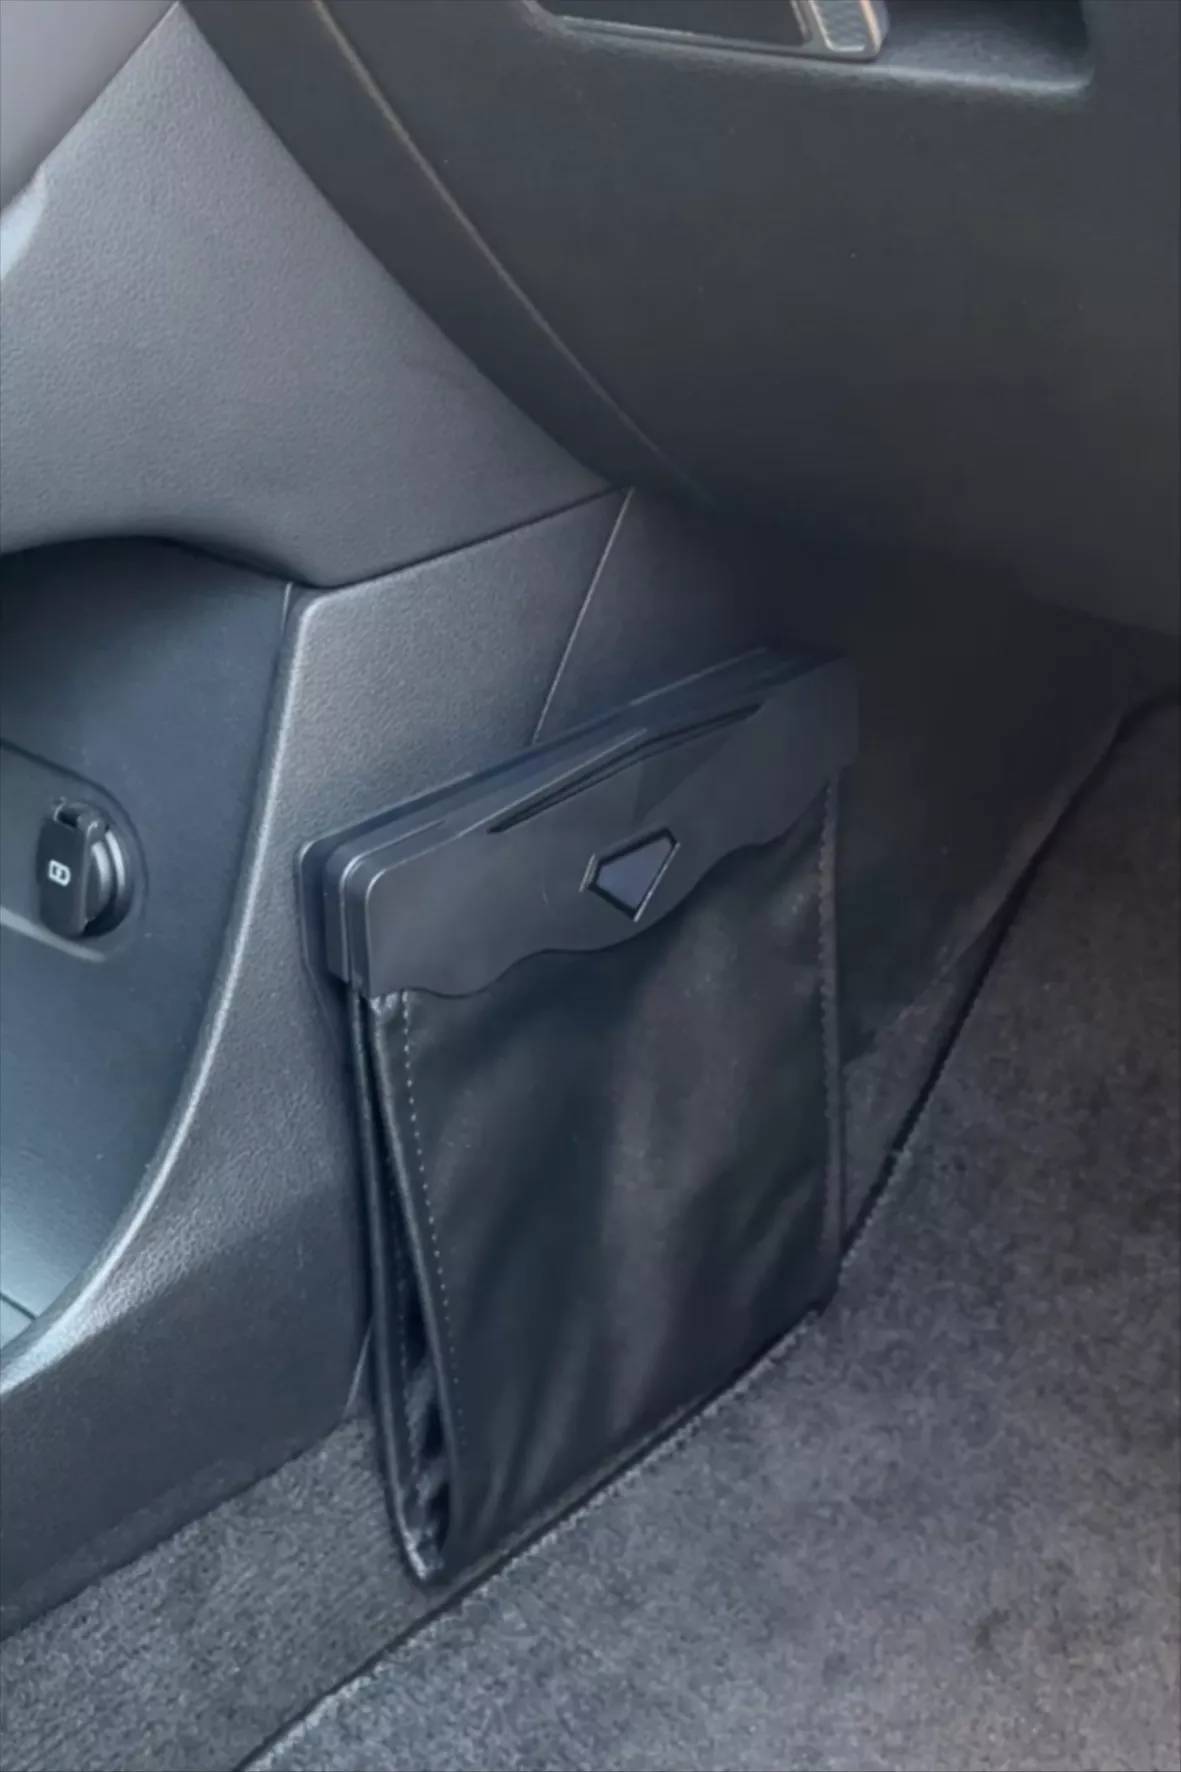  yicheyiyou Purse Holder for Cars Between Seats